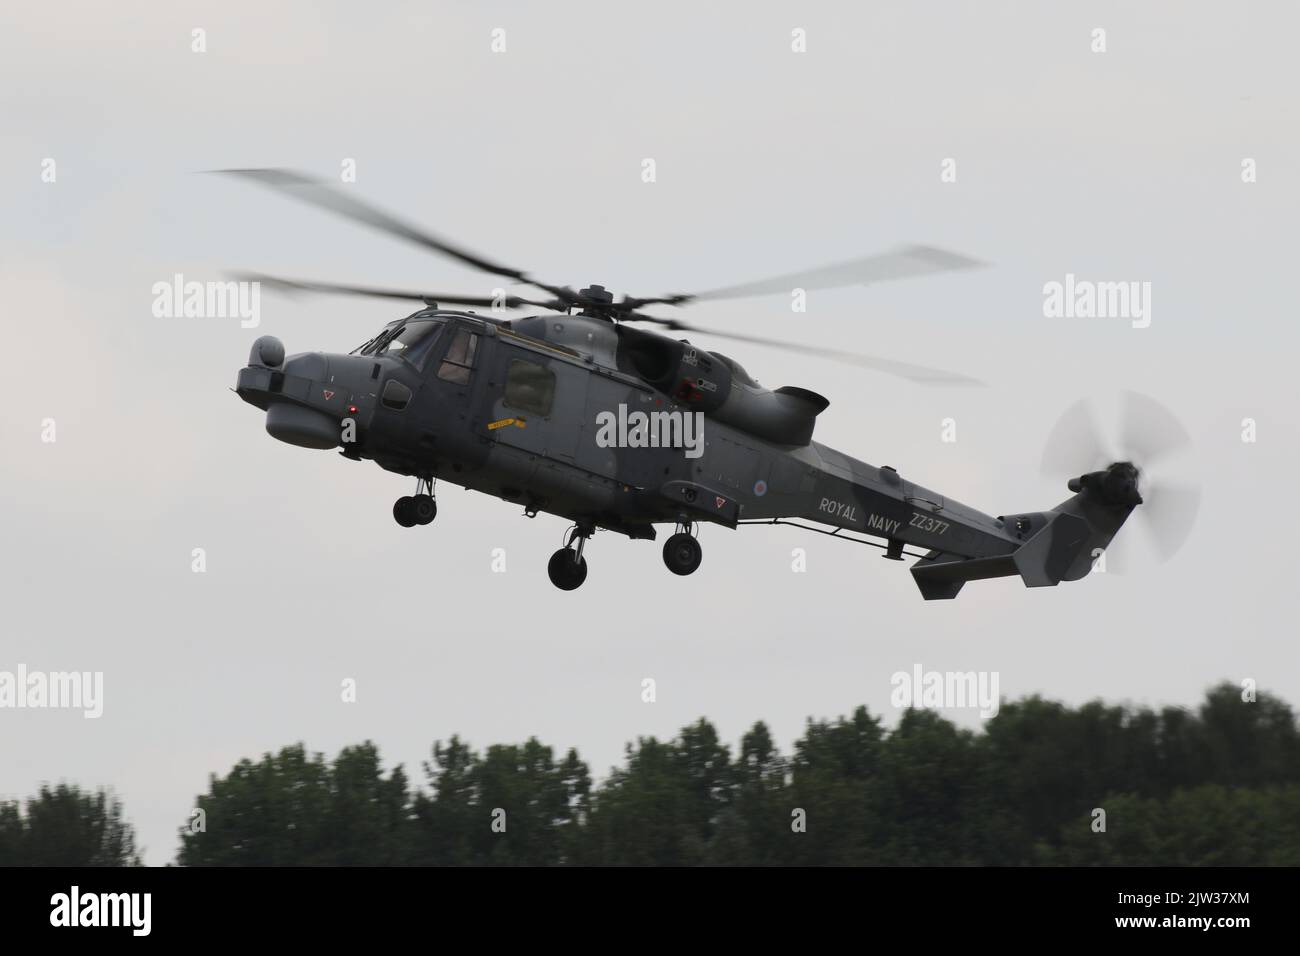 ZZ377, an AgustaWestland Wildcat HMA2 operated by the Royal Navy, arriving at RAF Fairford in Gloucestershire, England, to participate in the Royal International Air Tattoo 2022 (RIAT 2022). Stock Photo